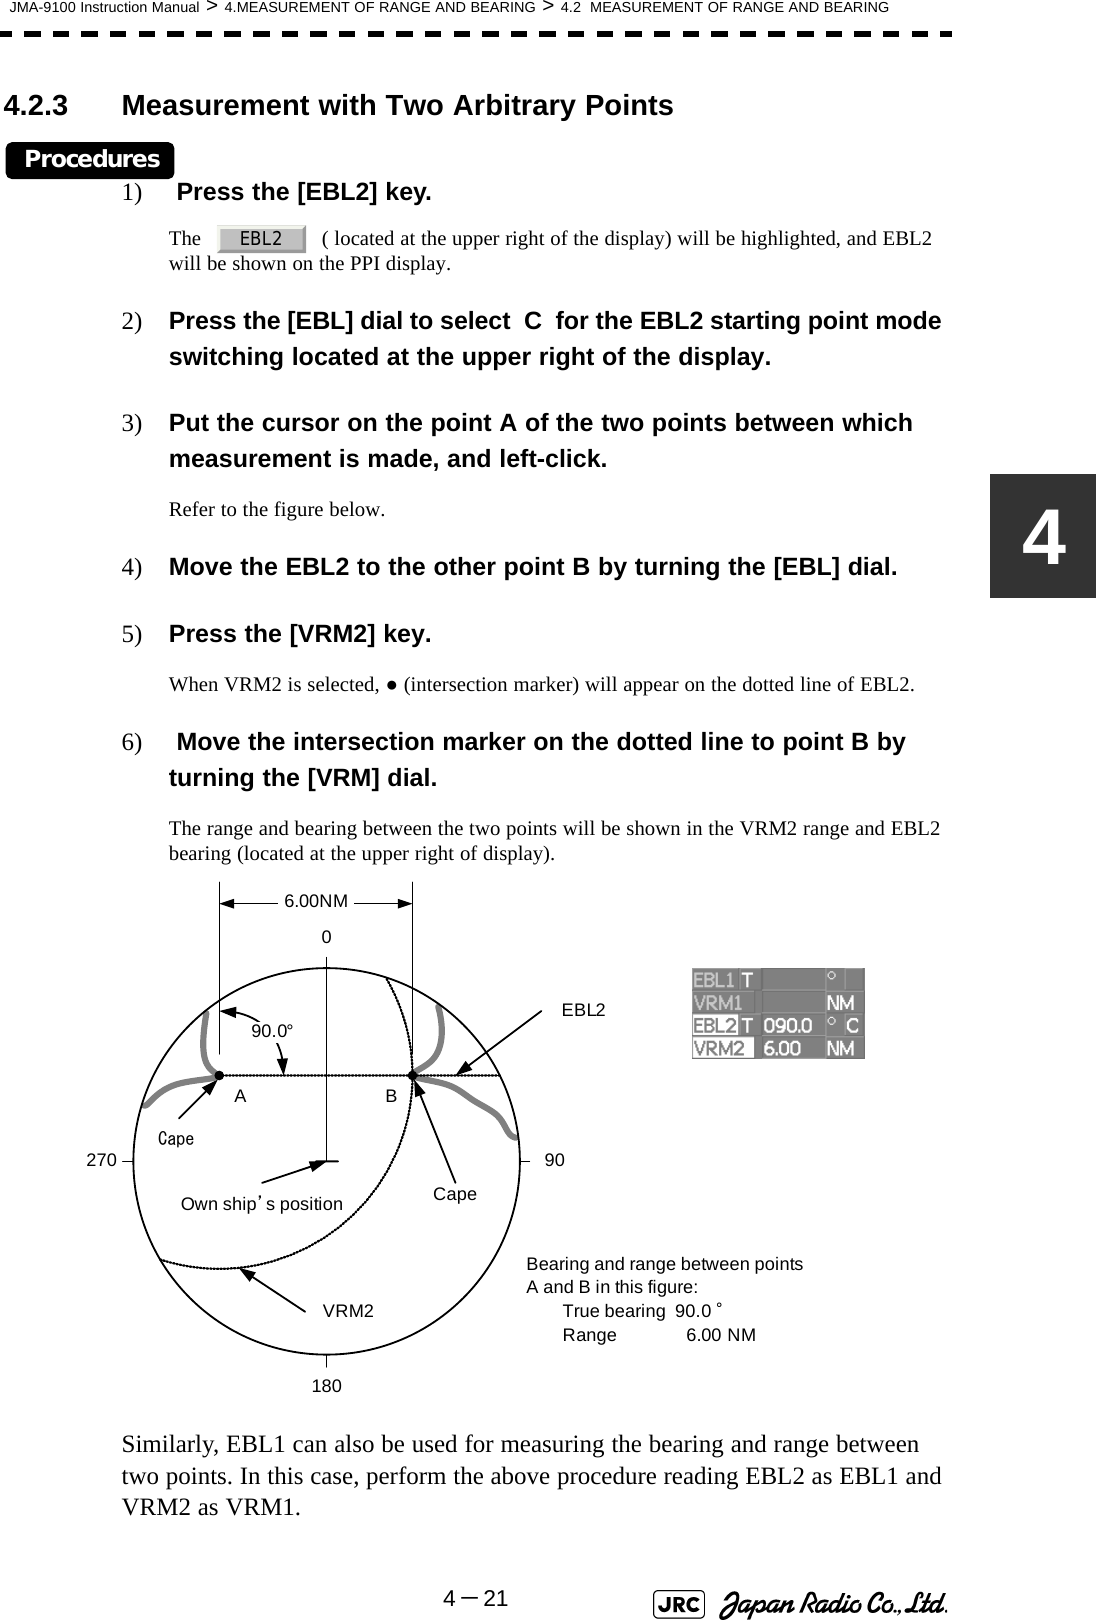 JMA-9100 Instruction Manual &gt; 4.MEASUREMENT OF RANGE AND BEARING &gt; 4.2  MEASUREMENT OF RANGE AND BEARING4－2144.2.3 Measurement with Two Arbitrary PointsProcedures1)  Press the [EBL2] key.The     ( located at the upper right of the display) will be highlighted, and EBL2 will be shown on the PPI display.2) Press the [EBL] dial to select  C  for the EBL2 starting point mode switching located at the upper right of the display.3) Put the cursor on the point A of the two points between which measurement is made, and left-click.Refer to the figure below.4) Move the EBL2 to the other point B by turning the [EBL] dial.5) Press the [VRM2] key.When VRM2 is selected, ● (intersection marker) will appear on the dotted line of EBL2.6)  Move the intersection marker on the dotted line to point B by turning the [VRM] dial.The range and bearing between the two points will be shown in the VRM2 range and EBL2 bearing (located at the upper right of display).Similarly, EBL1 can also be used for measuring the bearing and range between two points. In this case, perform the above procedure reading EBL2 as EBL1 and VRM2 as VRM1.EBL2CapeEBL290.0°1800 90270VRM26.00NMBearing and range between pointsA and B in this figure:True bearing  90.0 °Range 6.00 NMCapeABOwn ship’s position